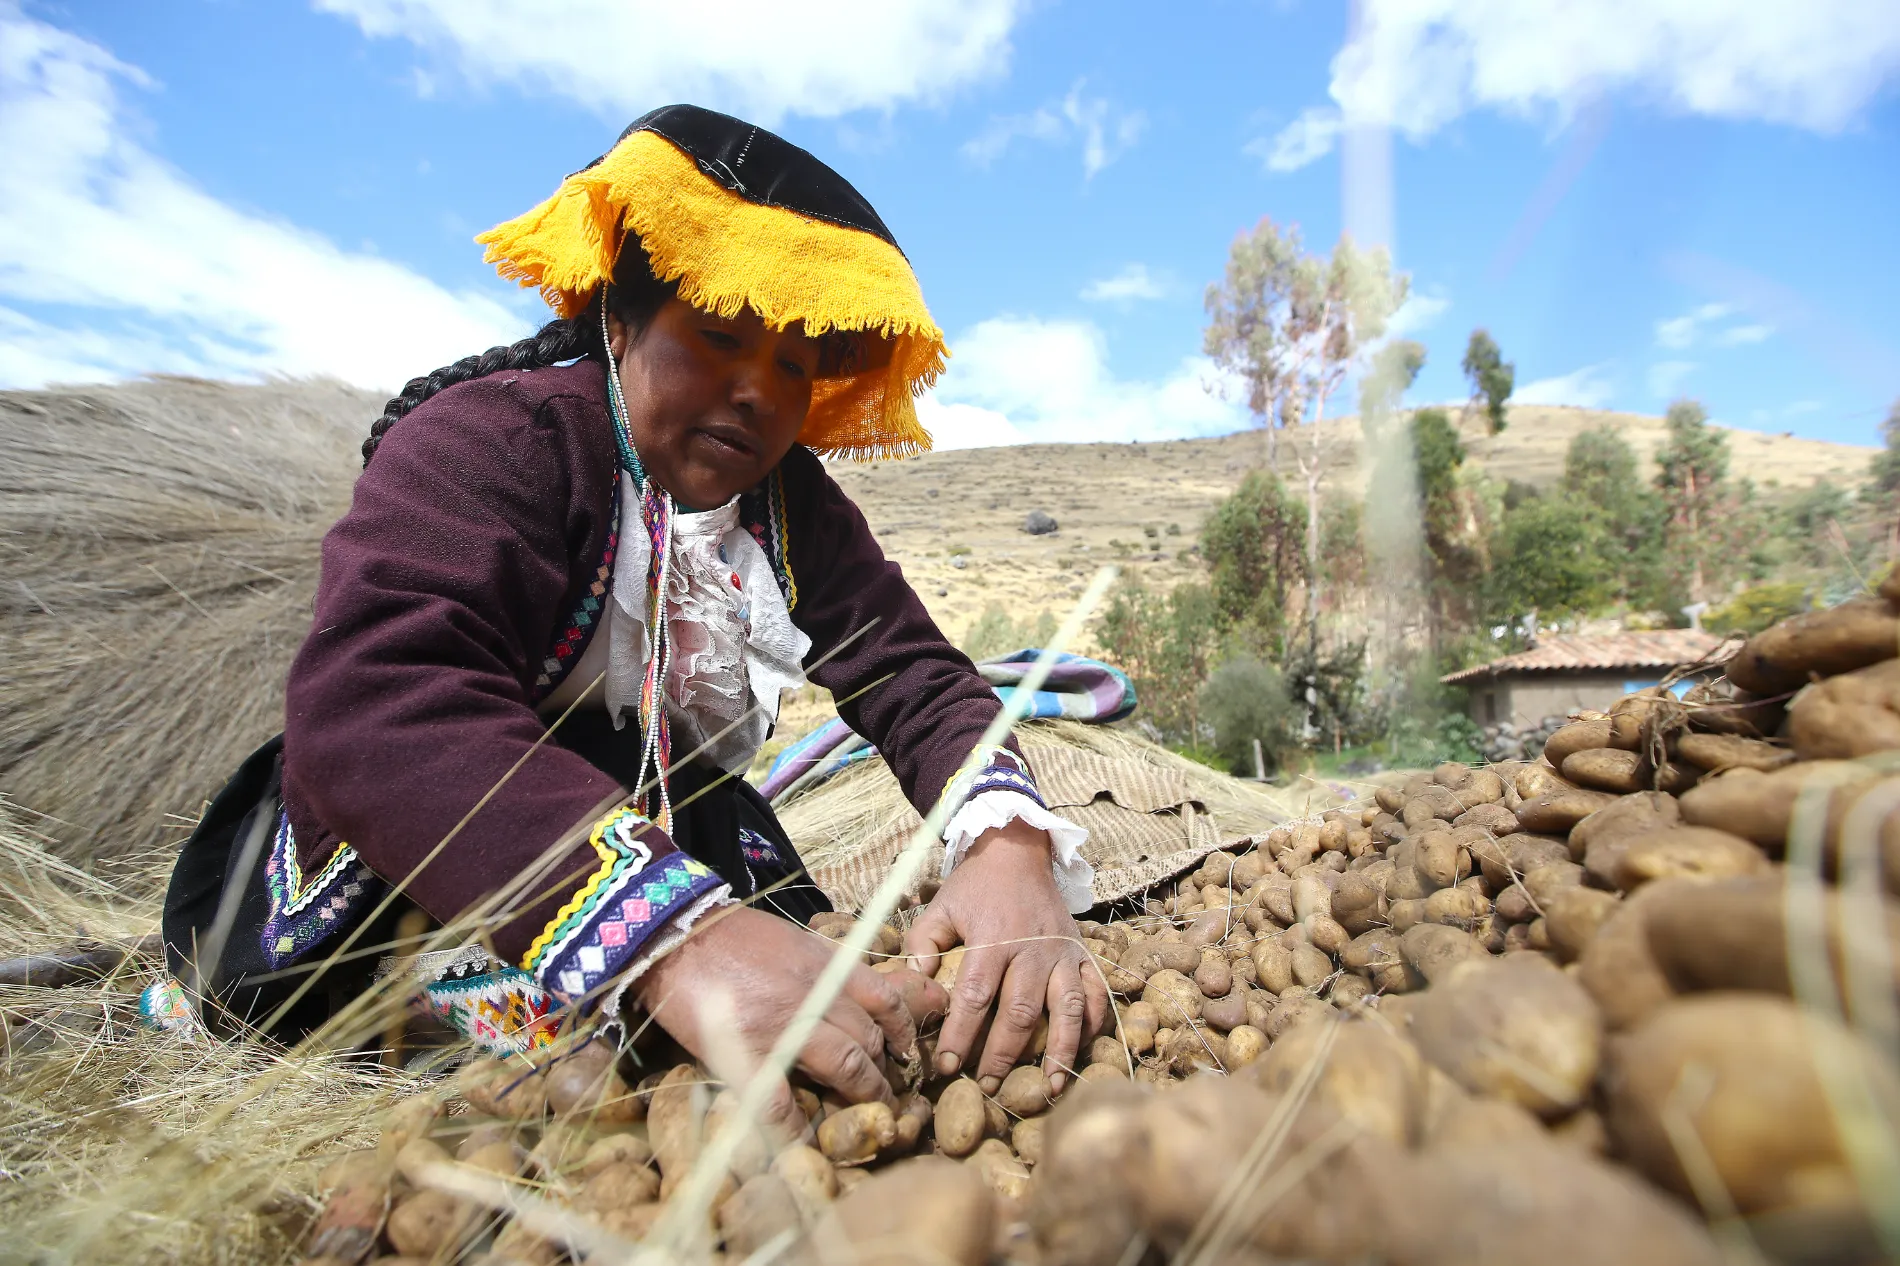 44-year-old farmer Justina Chipa works on the selection and classification of potatoes after the harvest on June 21, 2022 in Pisac, Peru.